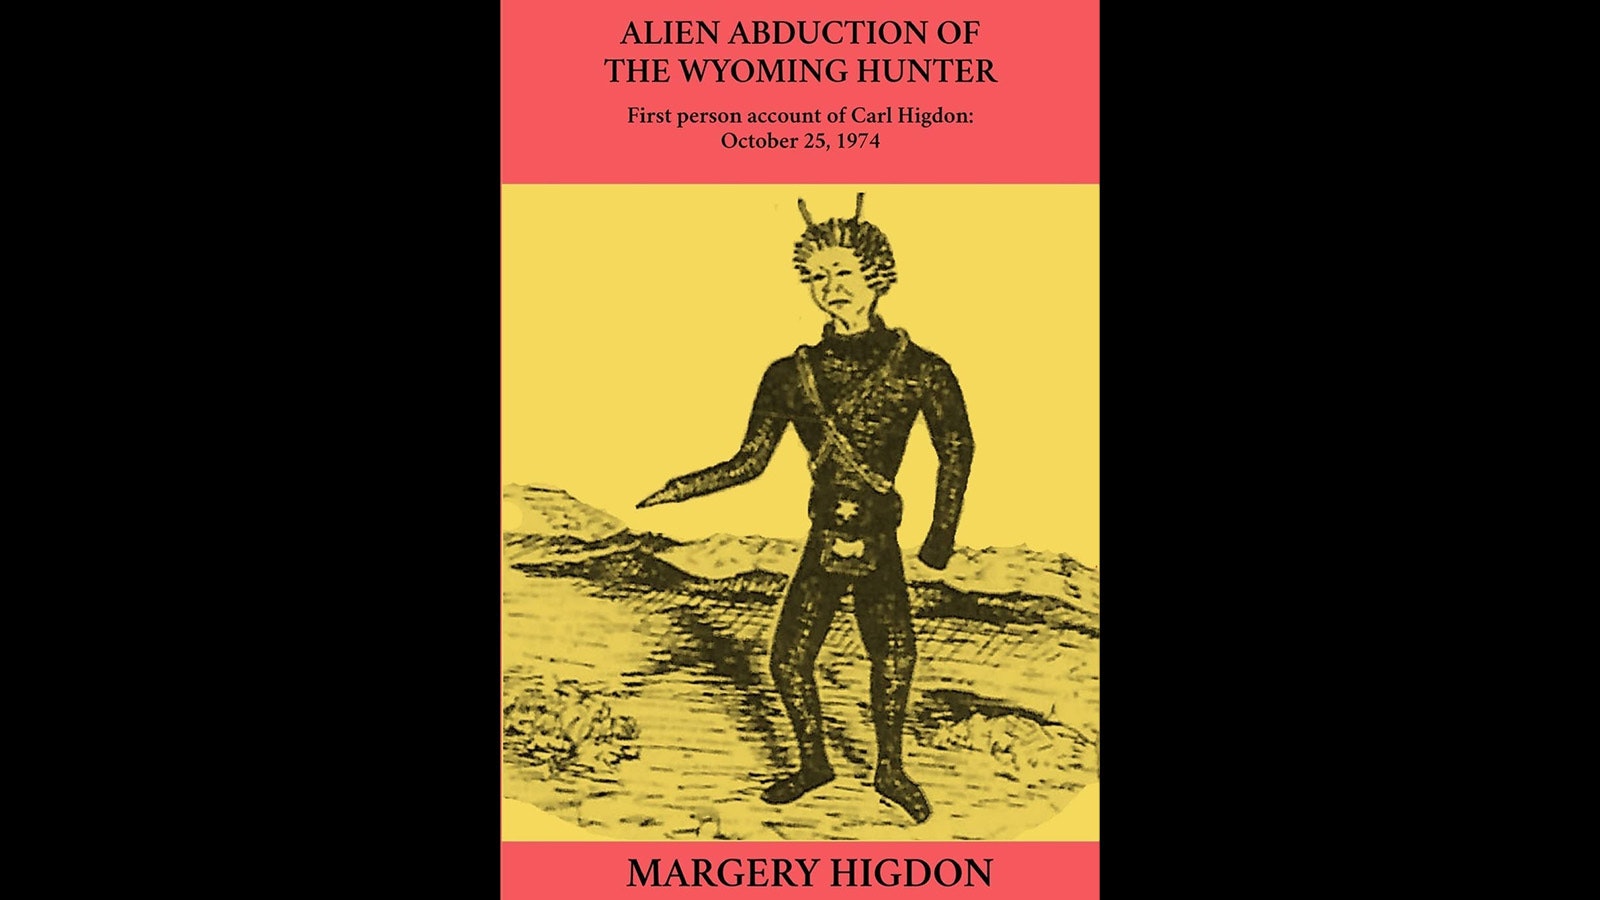 Margery Higdon, wife of Carl Higdon, wrote this account of her husband's alien abduction while out hunting in Wyoming.